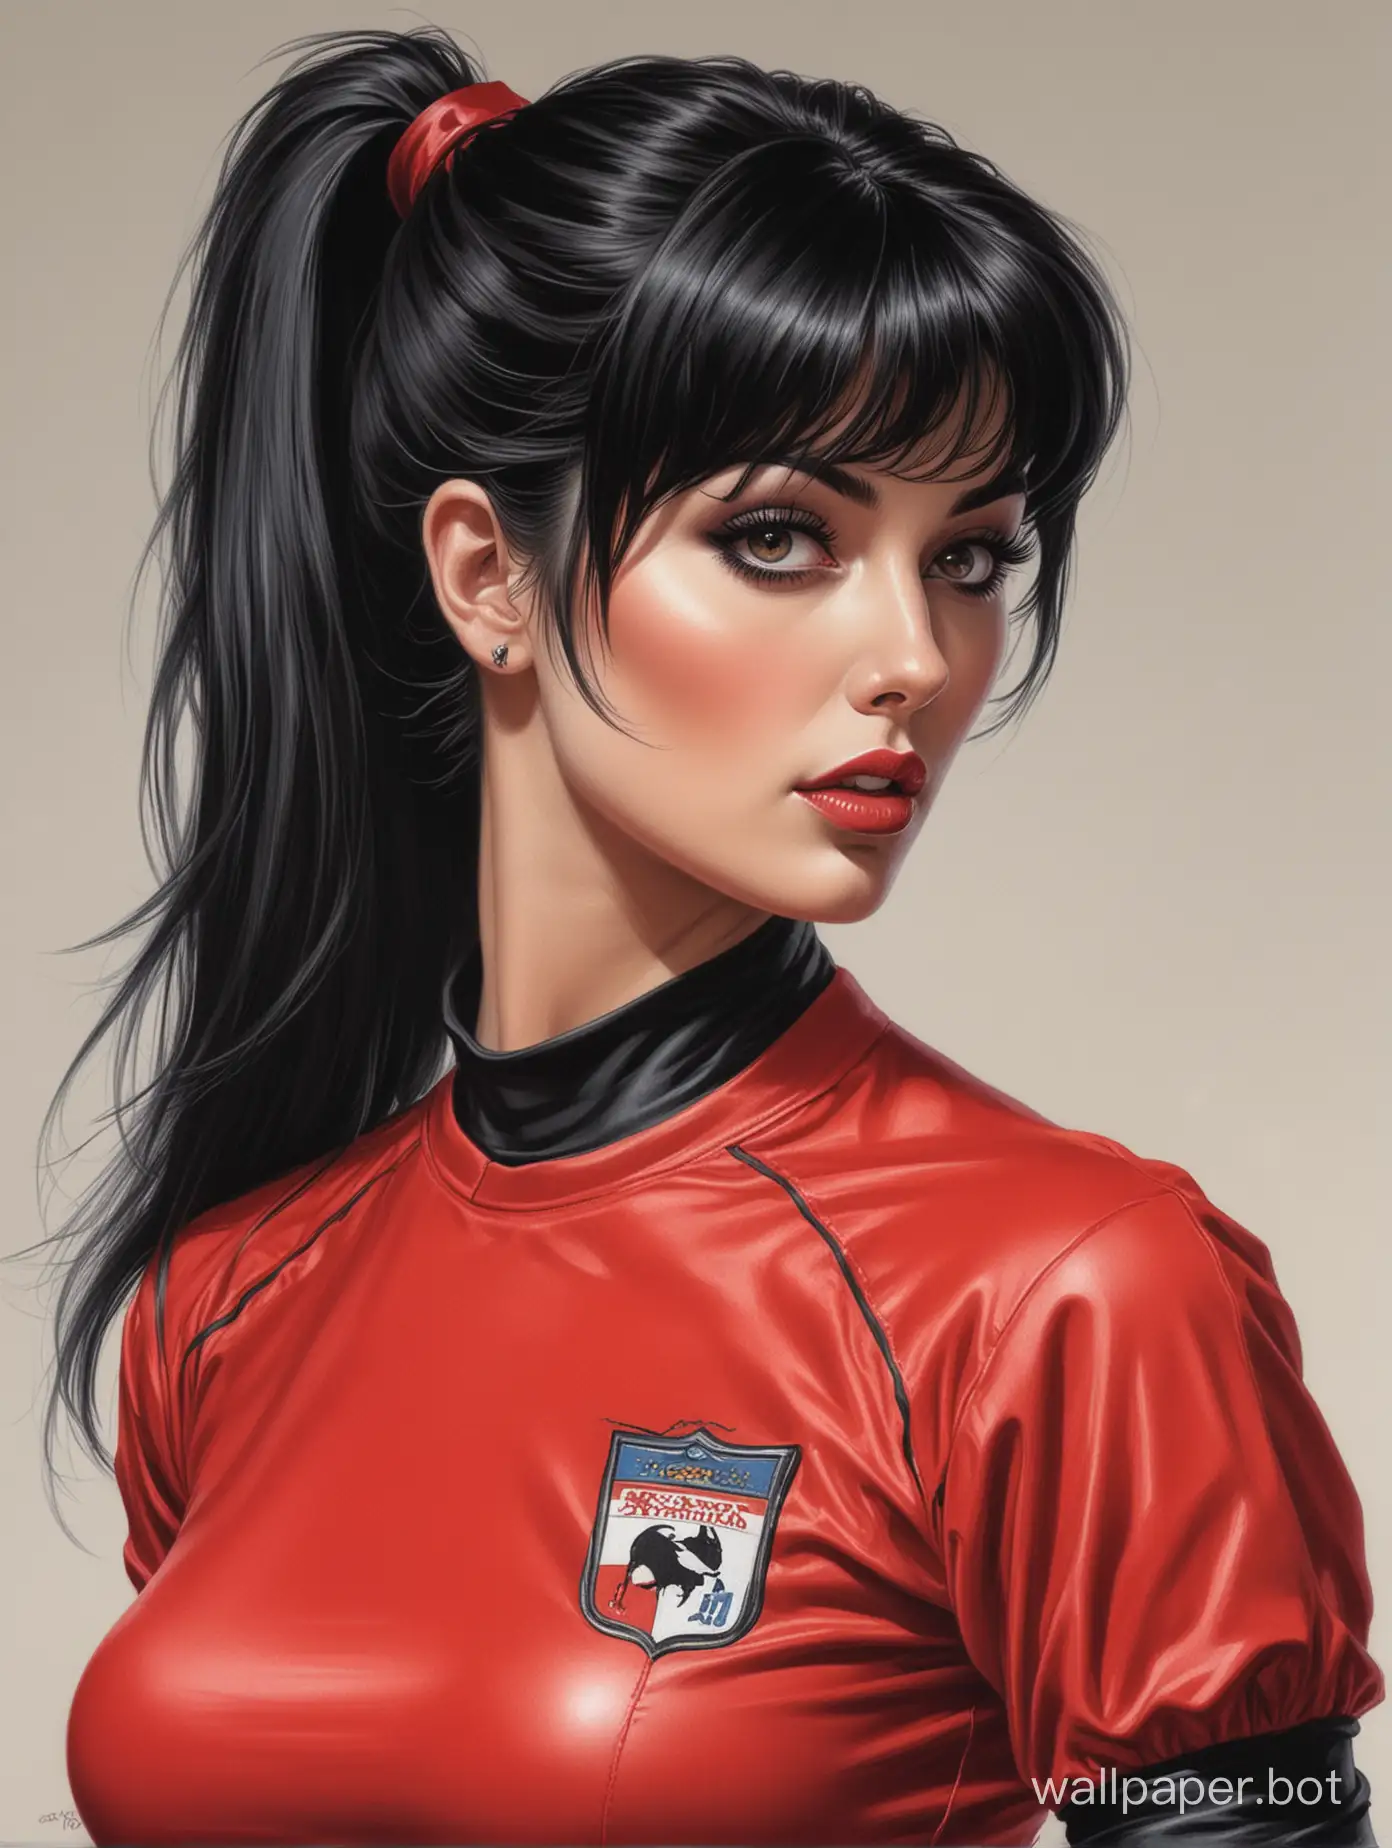 sketch Elvira Mistress of Darkness 25 years old dark hair with ponytails 6 size chest narrow waist In red and black soccer uniform white background high realism Style Boris Vallejo portrait in semi-profile